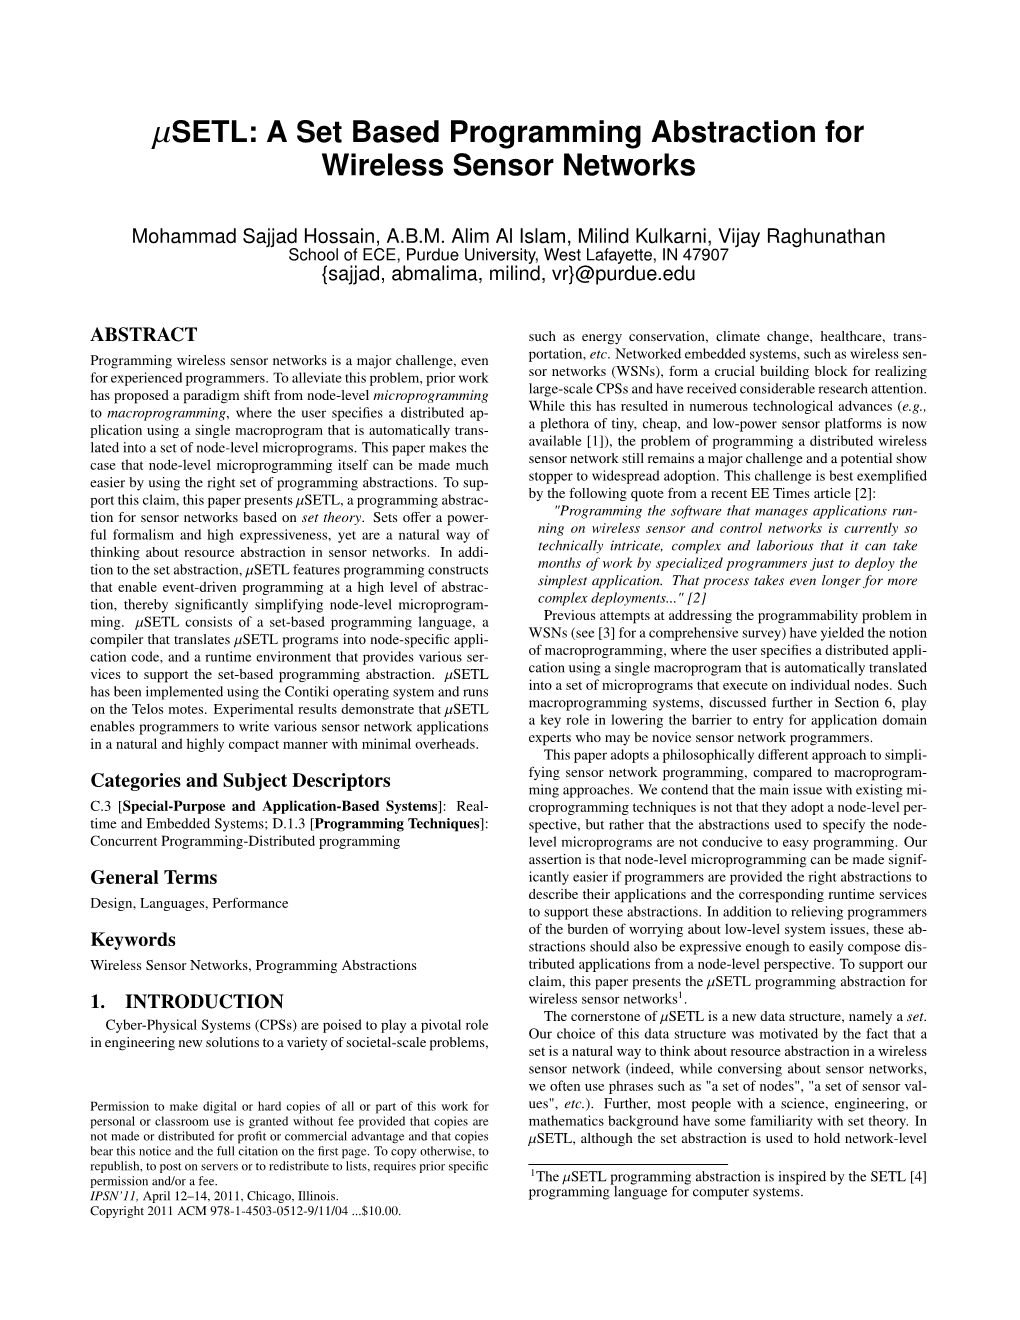 A Set Based Programming Abstraction for Wireless Sensor Networks